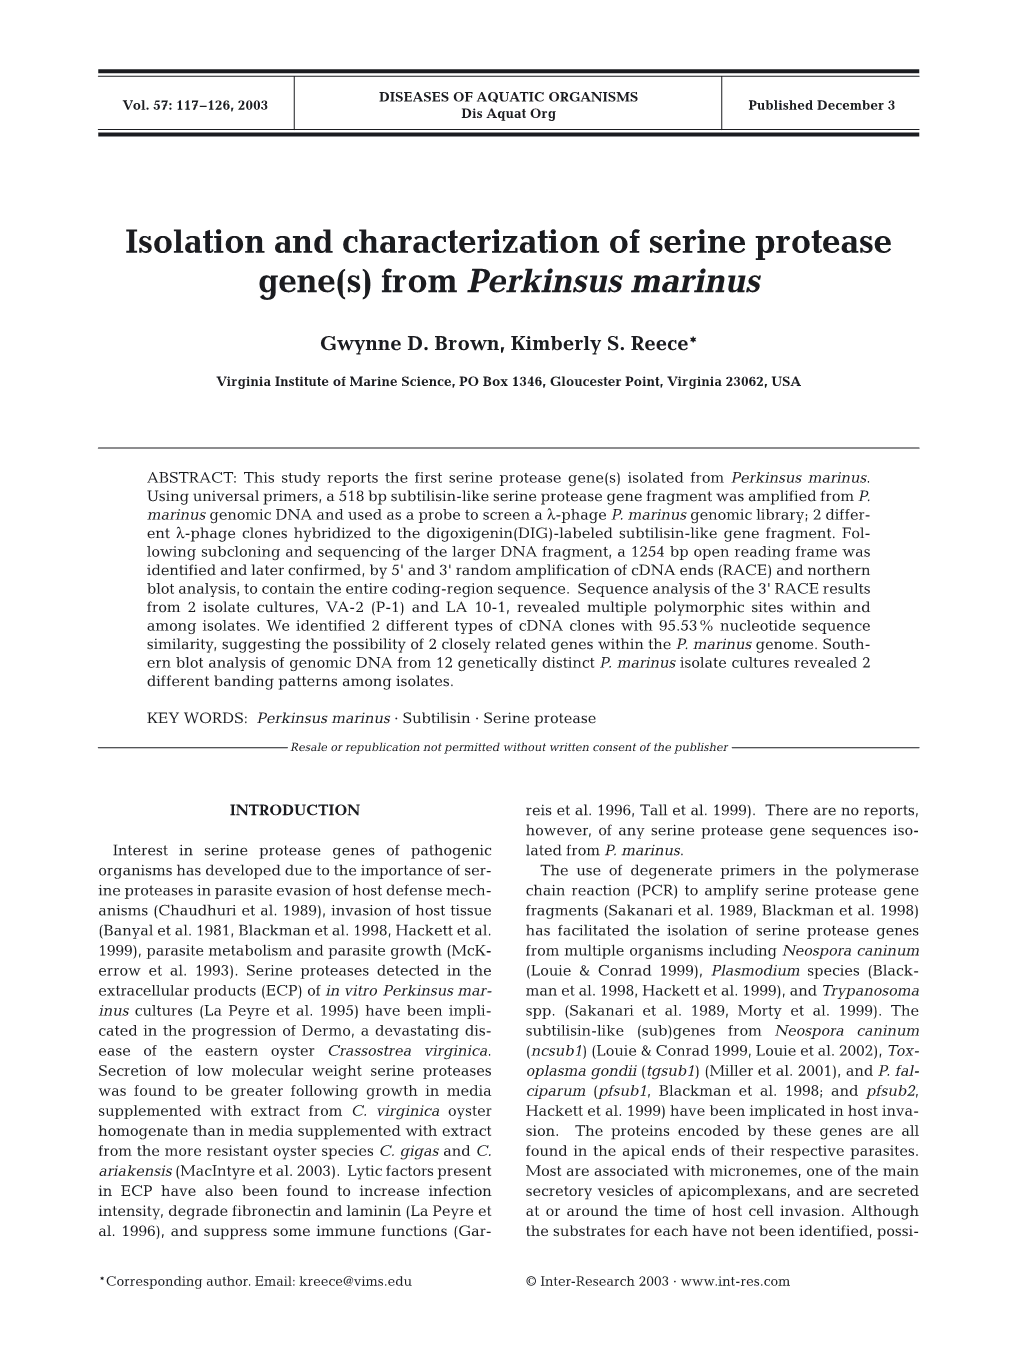 Isolation and Characterization of Serine Protease Gene(S) from Perkinsus Marinus